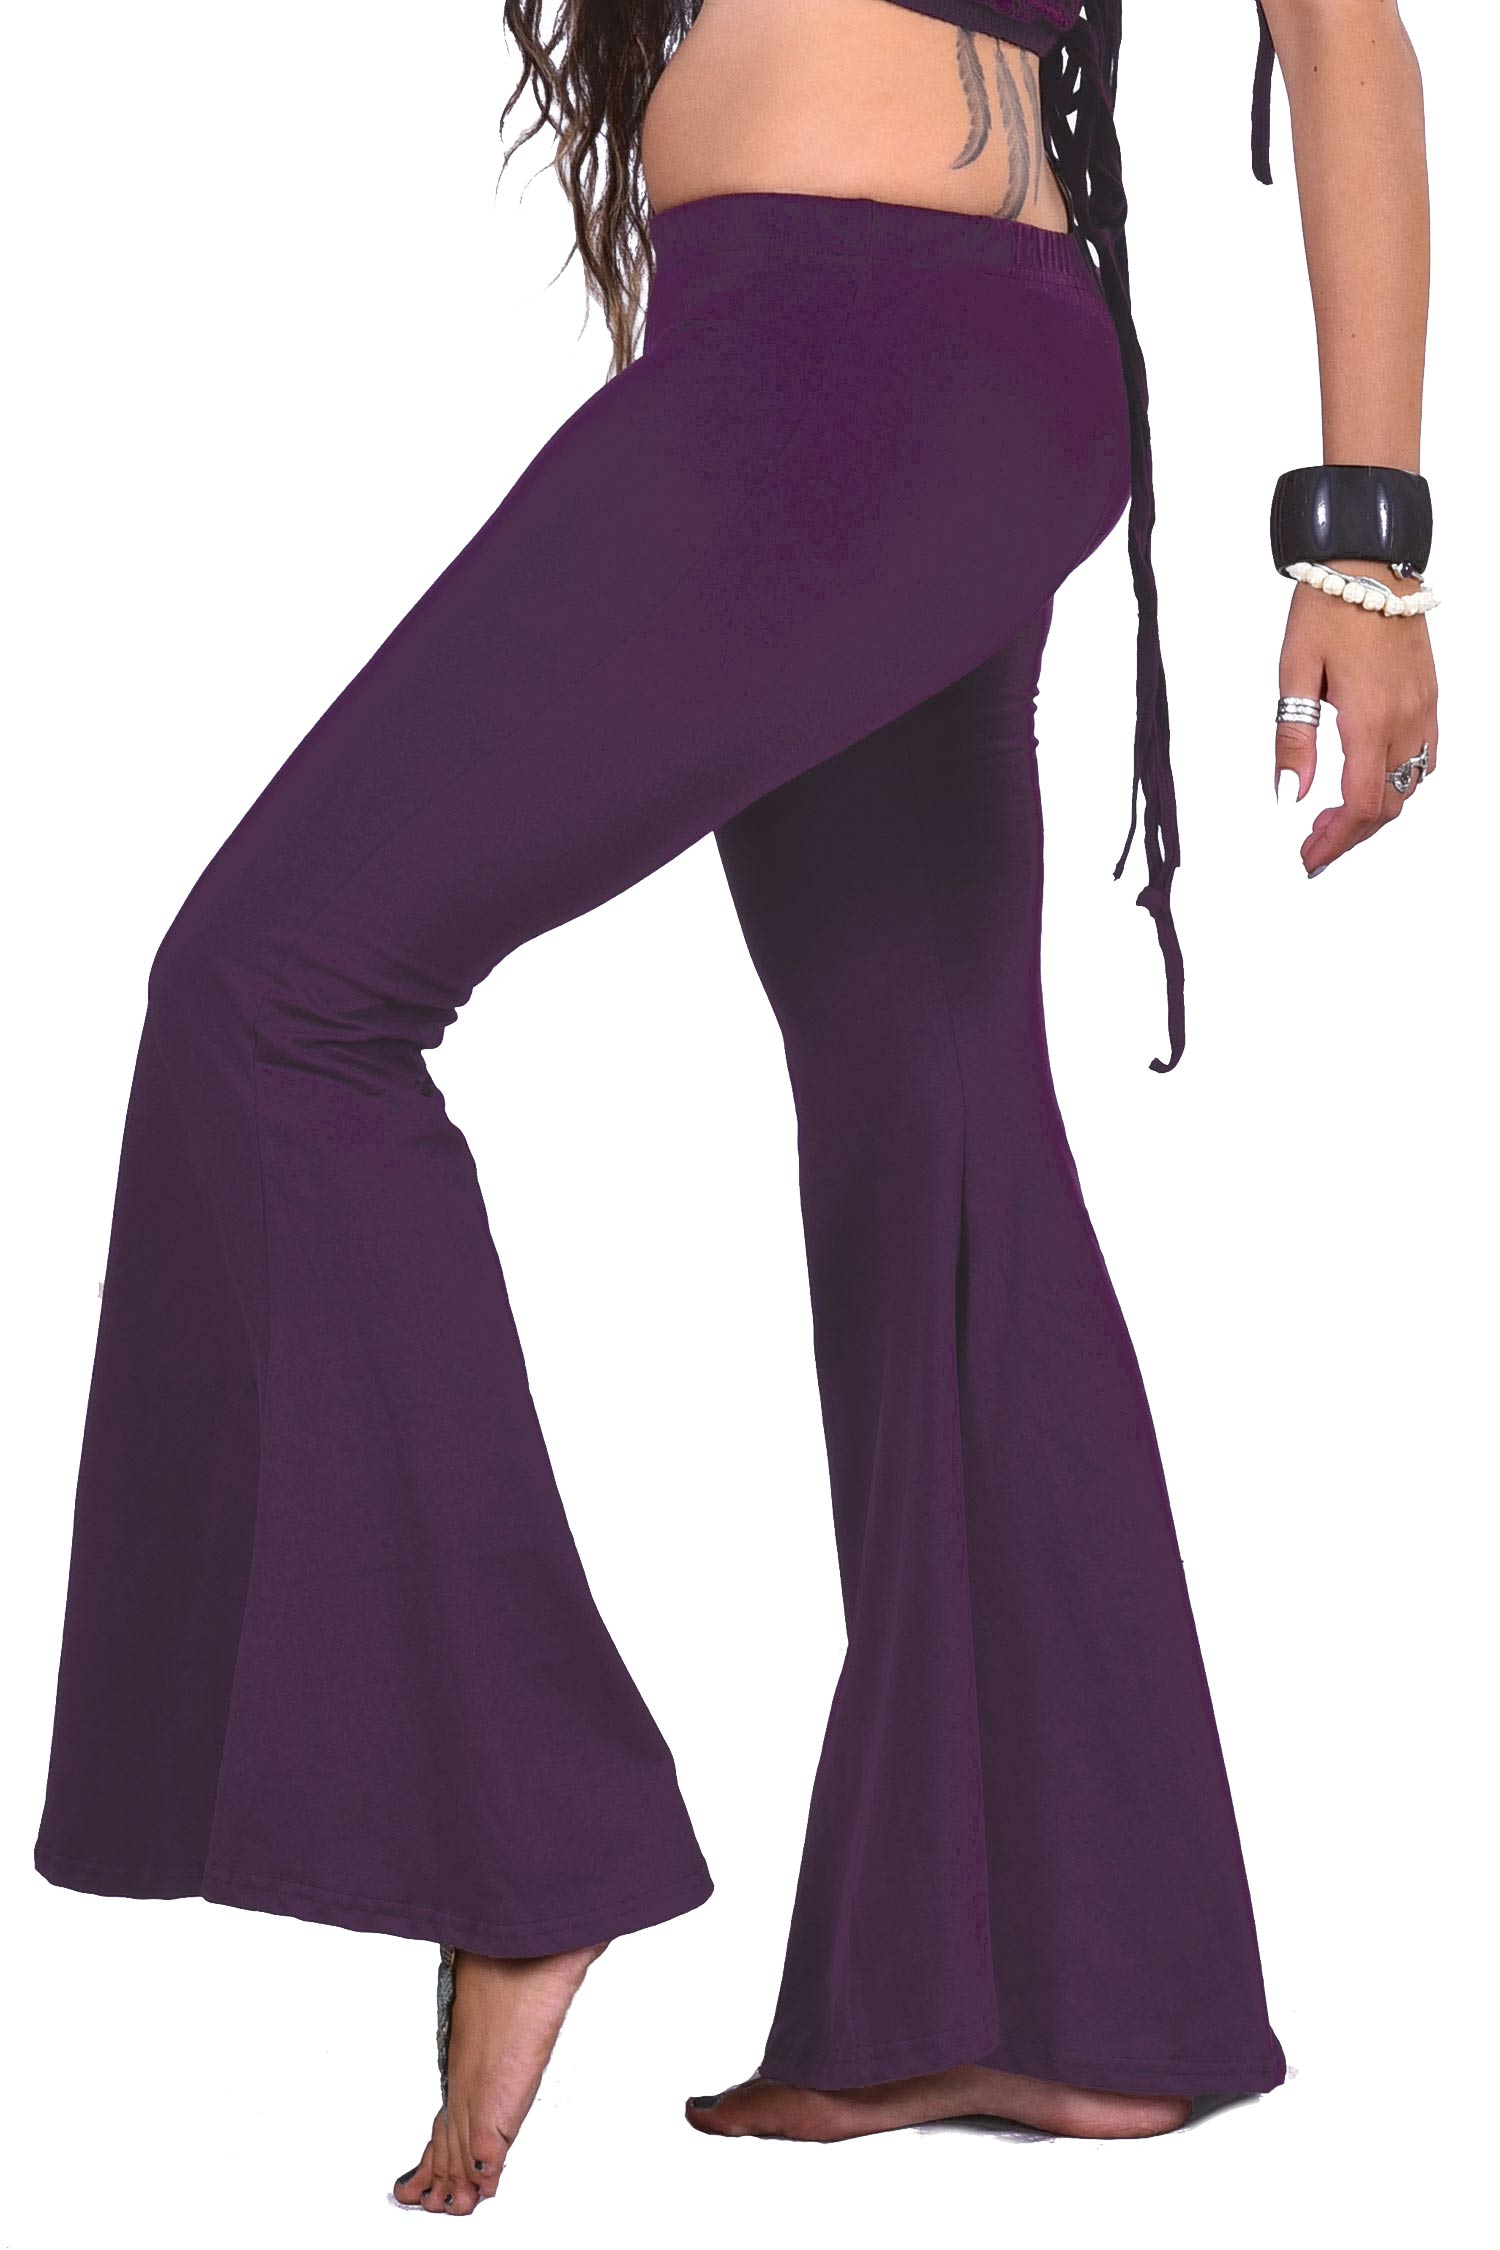 Bell Bottoms Boho Trousers, Yoga Stretch Flare Pants